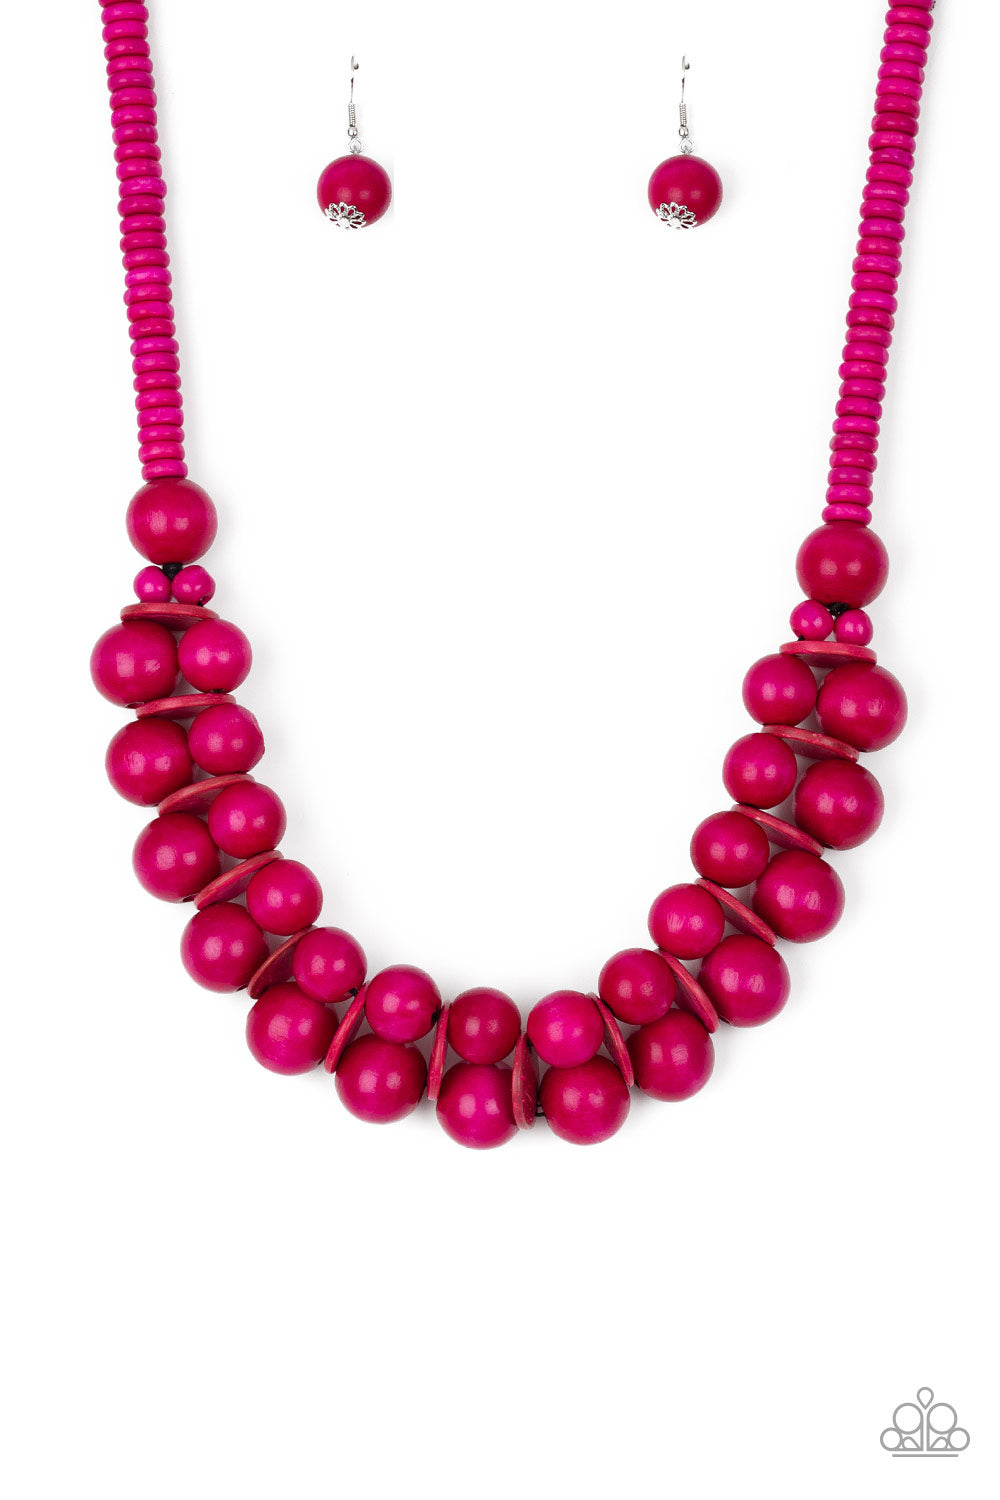 Caribbean Cover Girl Pink Paparazzi Necklace Cashmere Pink Jewels - Cashmere Pink Jewels & Accessories, Cashmere Pink Jewels & Accessories - Paparazzi